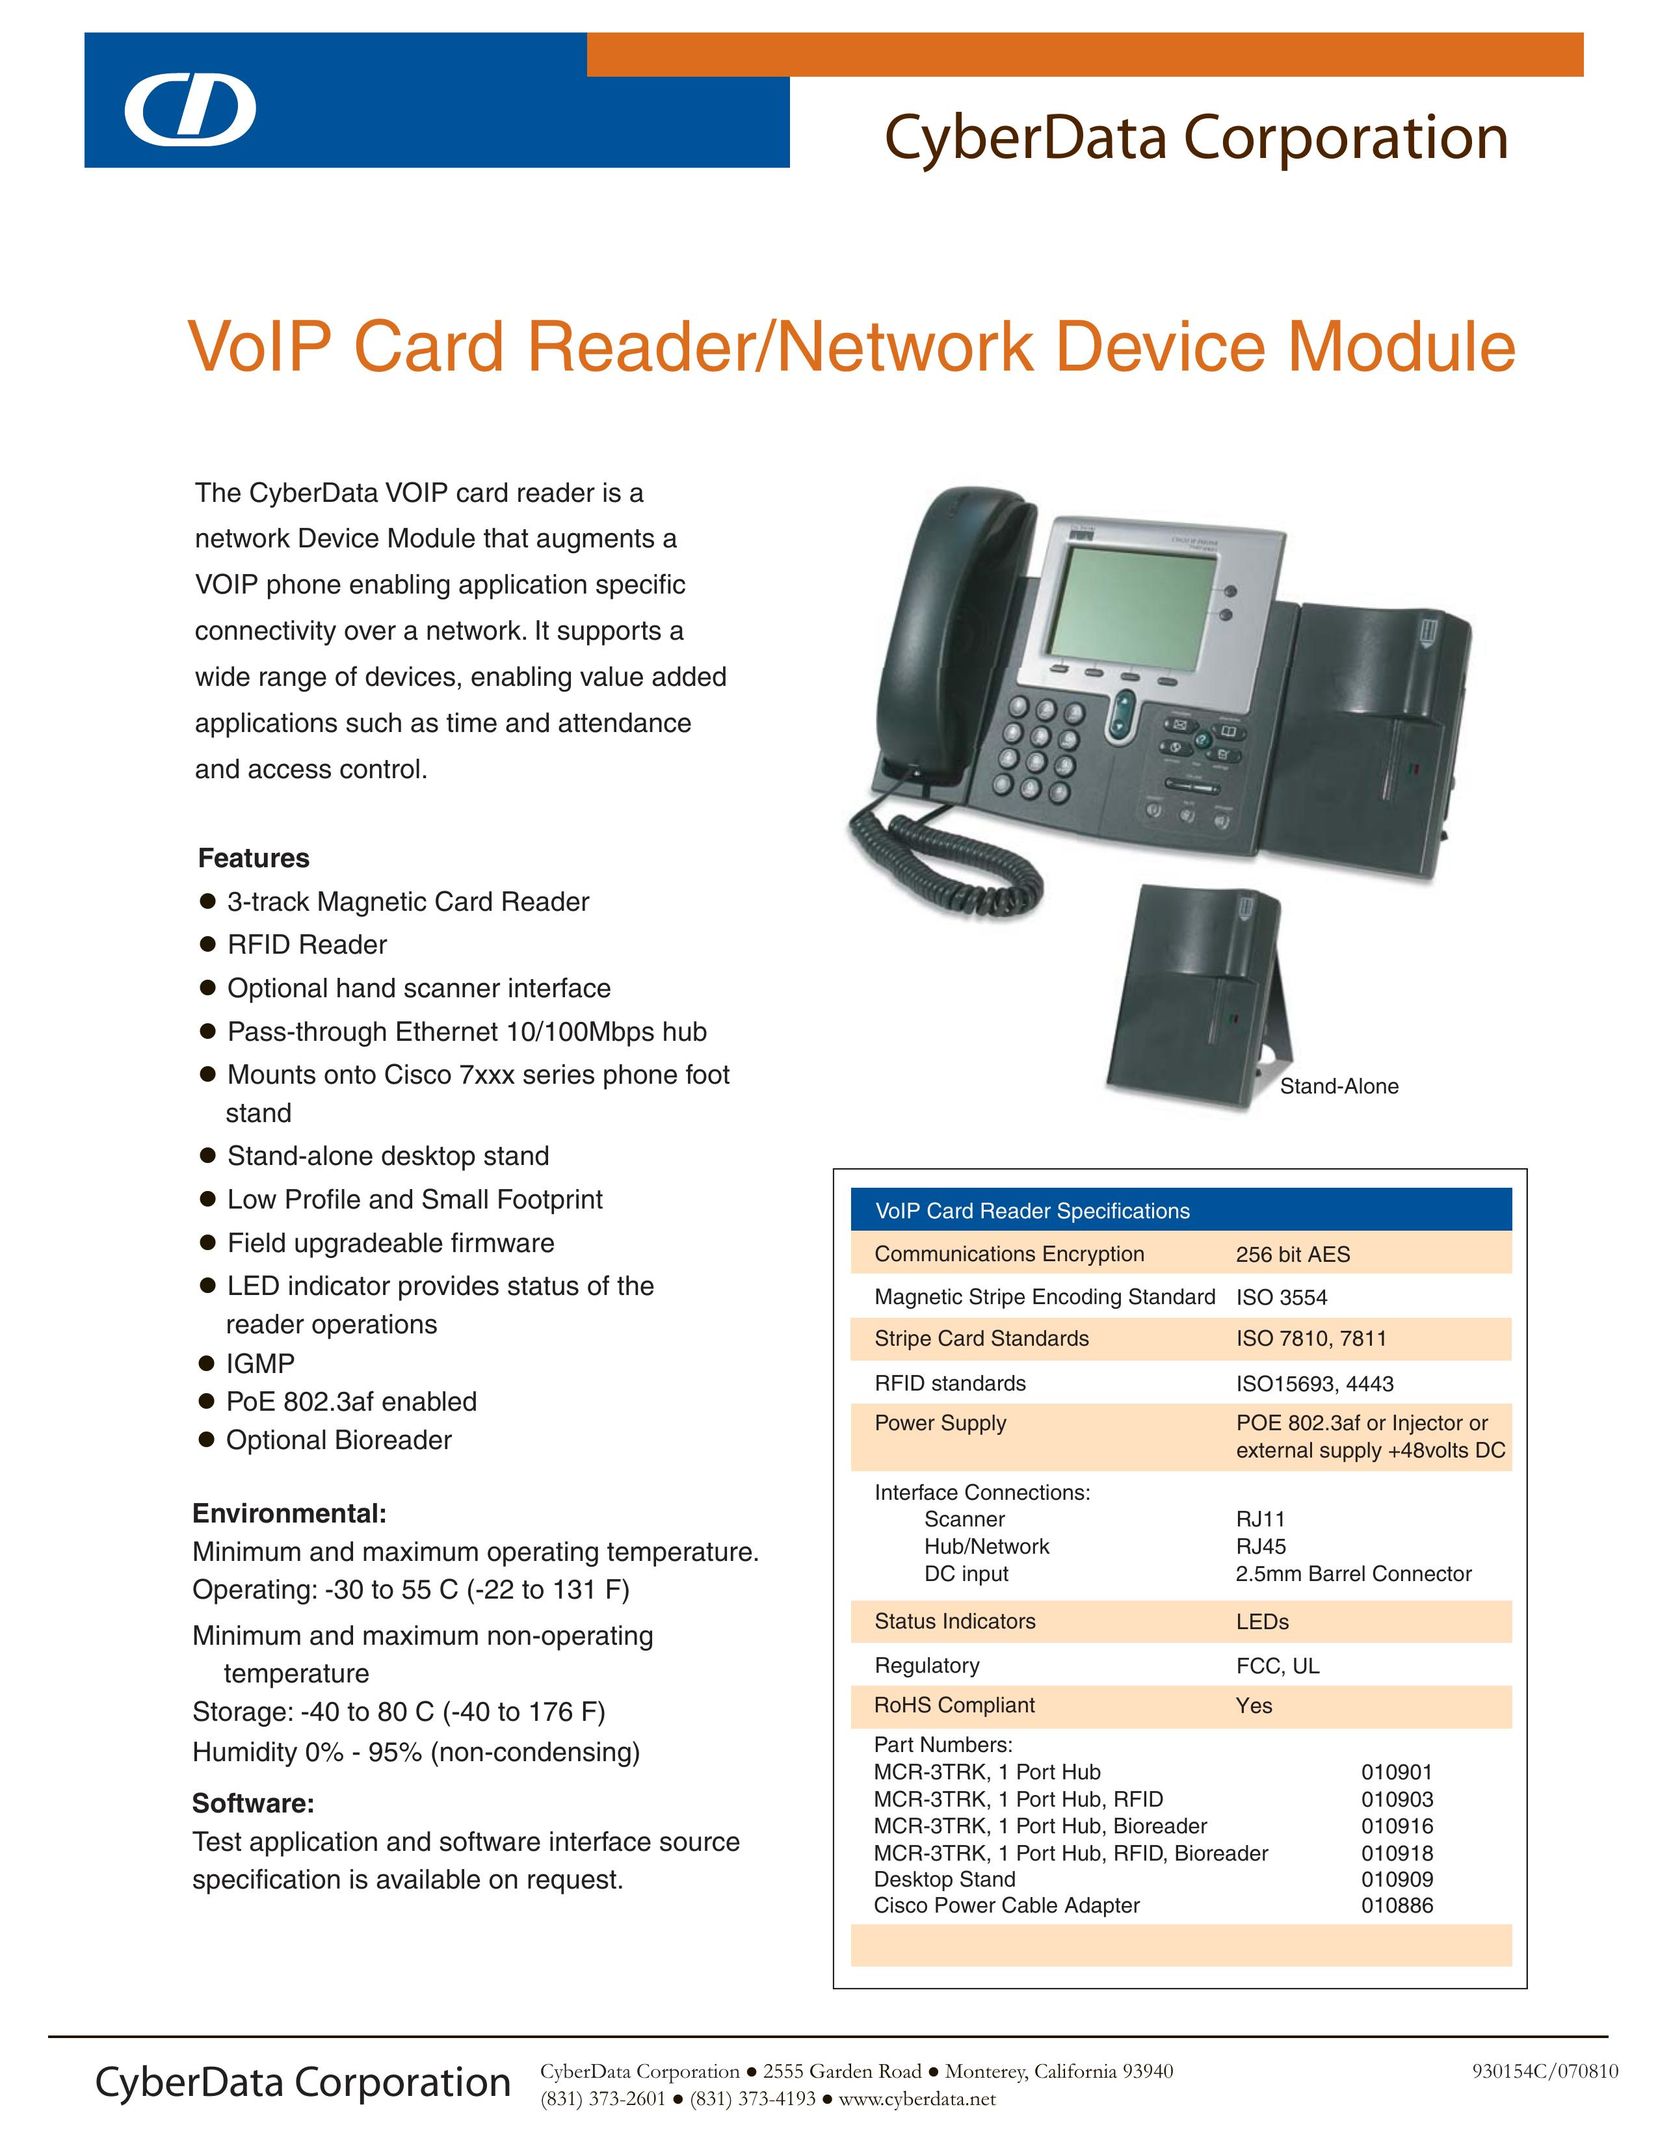 CyberData VoIP Card Reader/Network Device Module Network Card User Manual